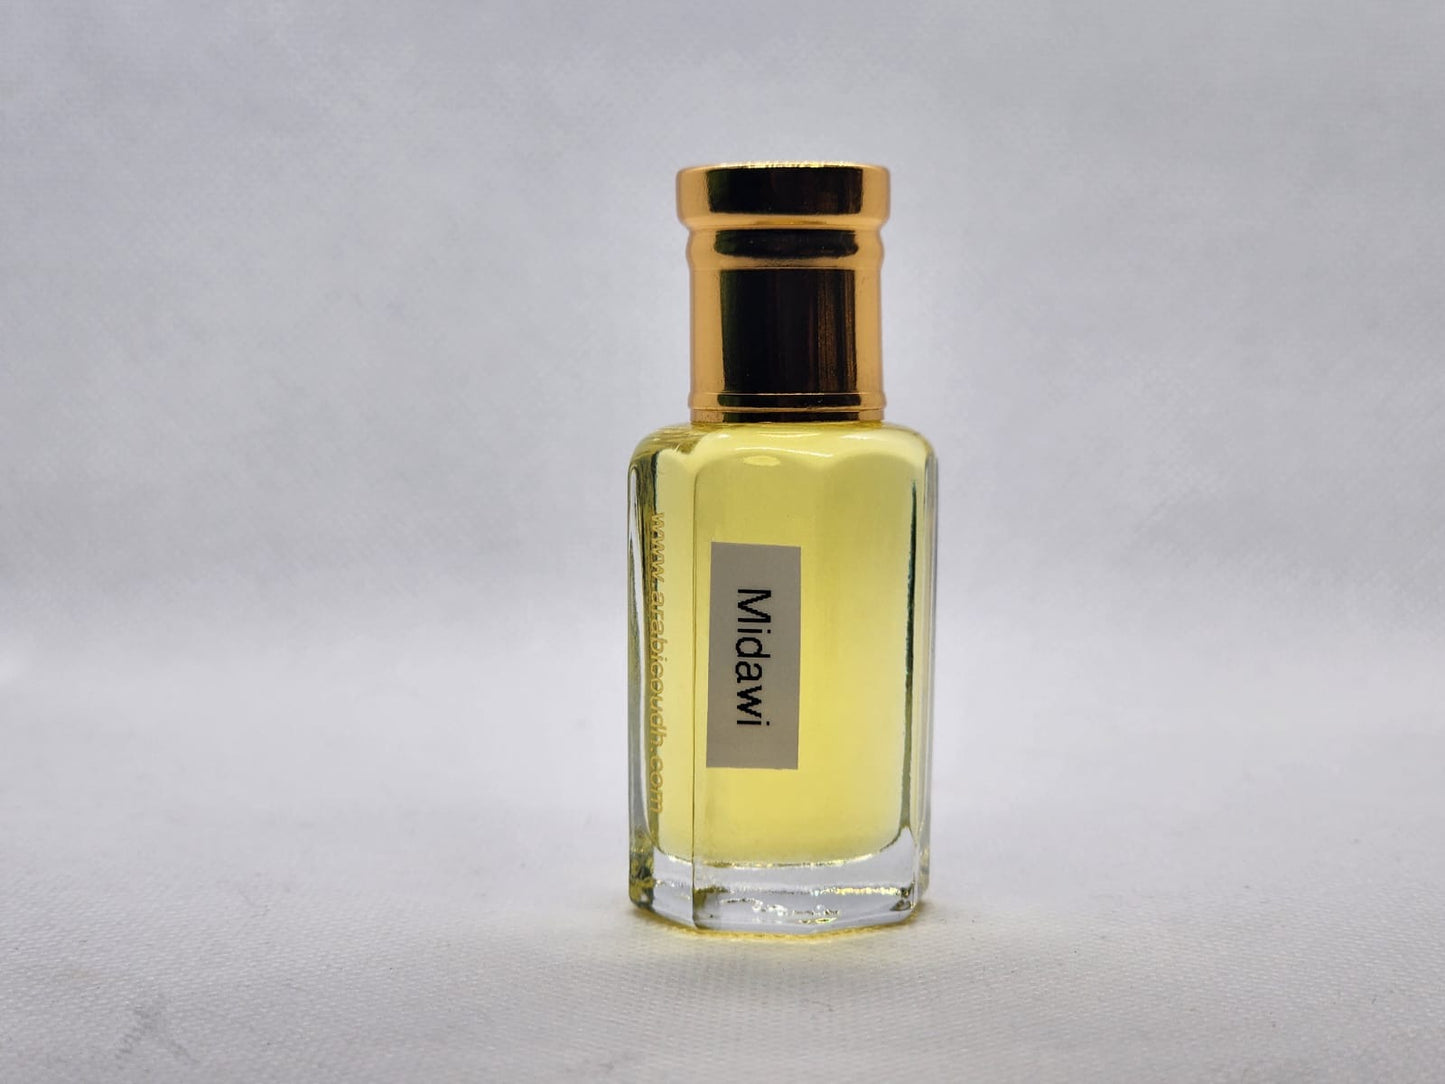 Midawi Perfume Oil / Attar - Concentrated Perfume oil - Alcohol free